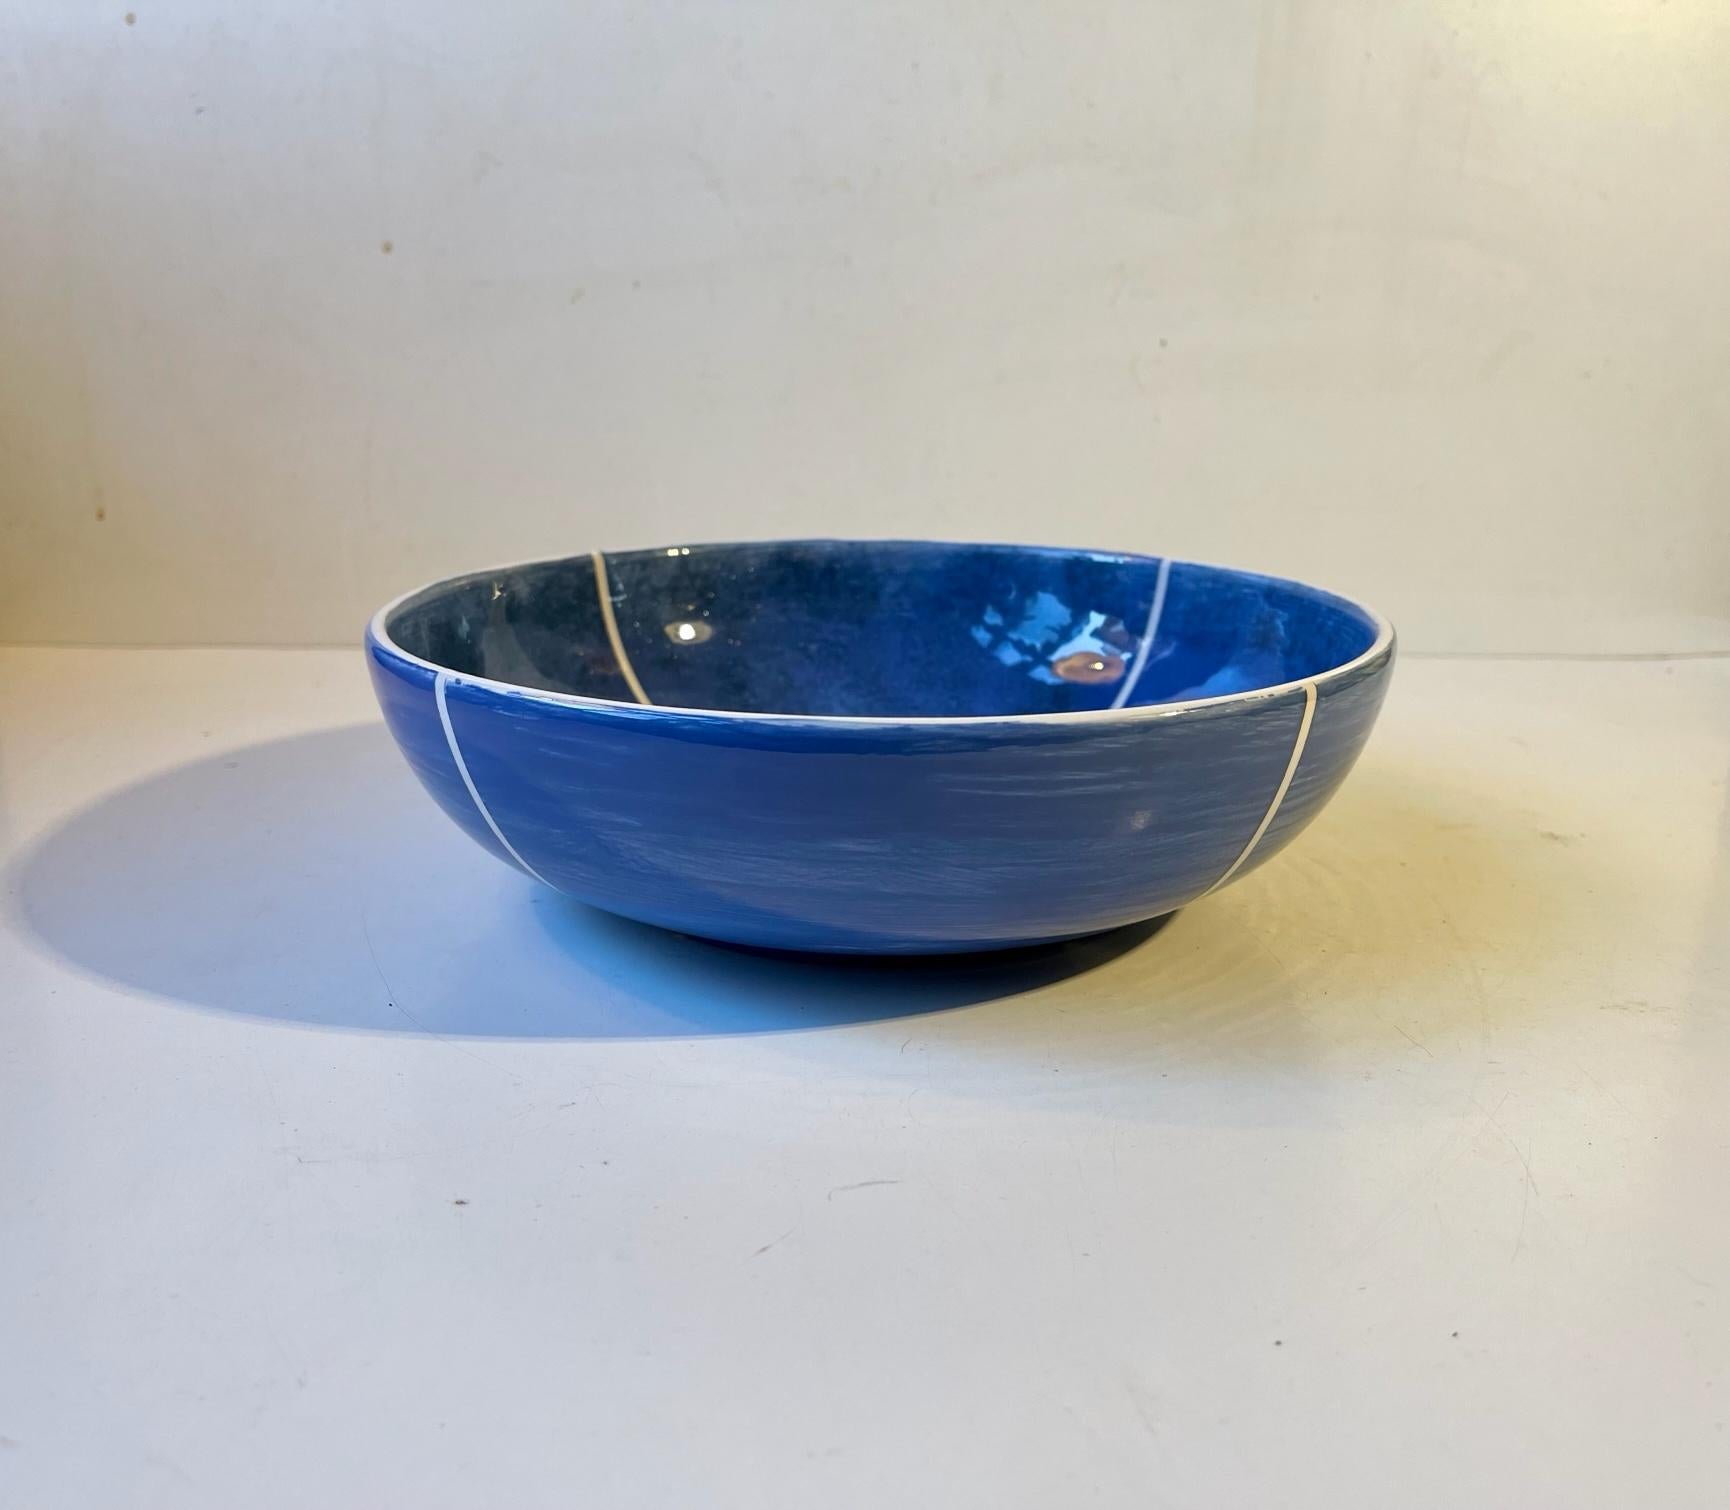 Danish ceramic fruit bowl or centerpiece featuring a 'sky-like' blue glaze highlighted with diagonal white lines and edge. Anonymous Danish designer/maker TVK ca 1980. Measurements: D: 23, H: 6.7 cm.